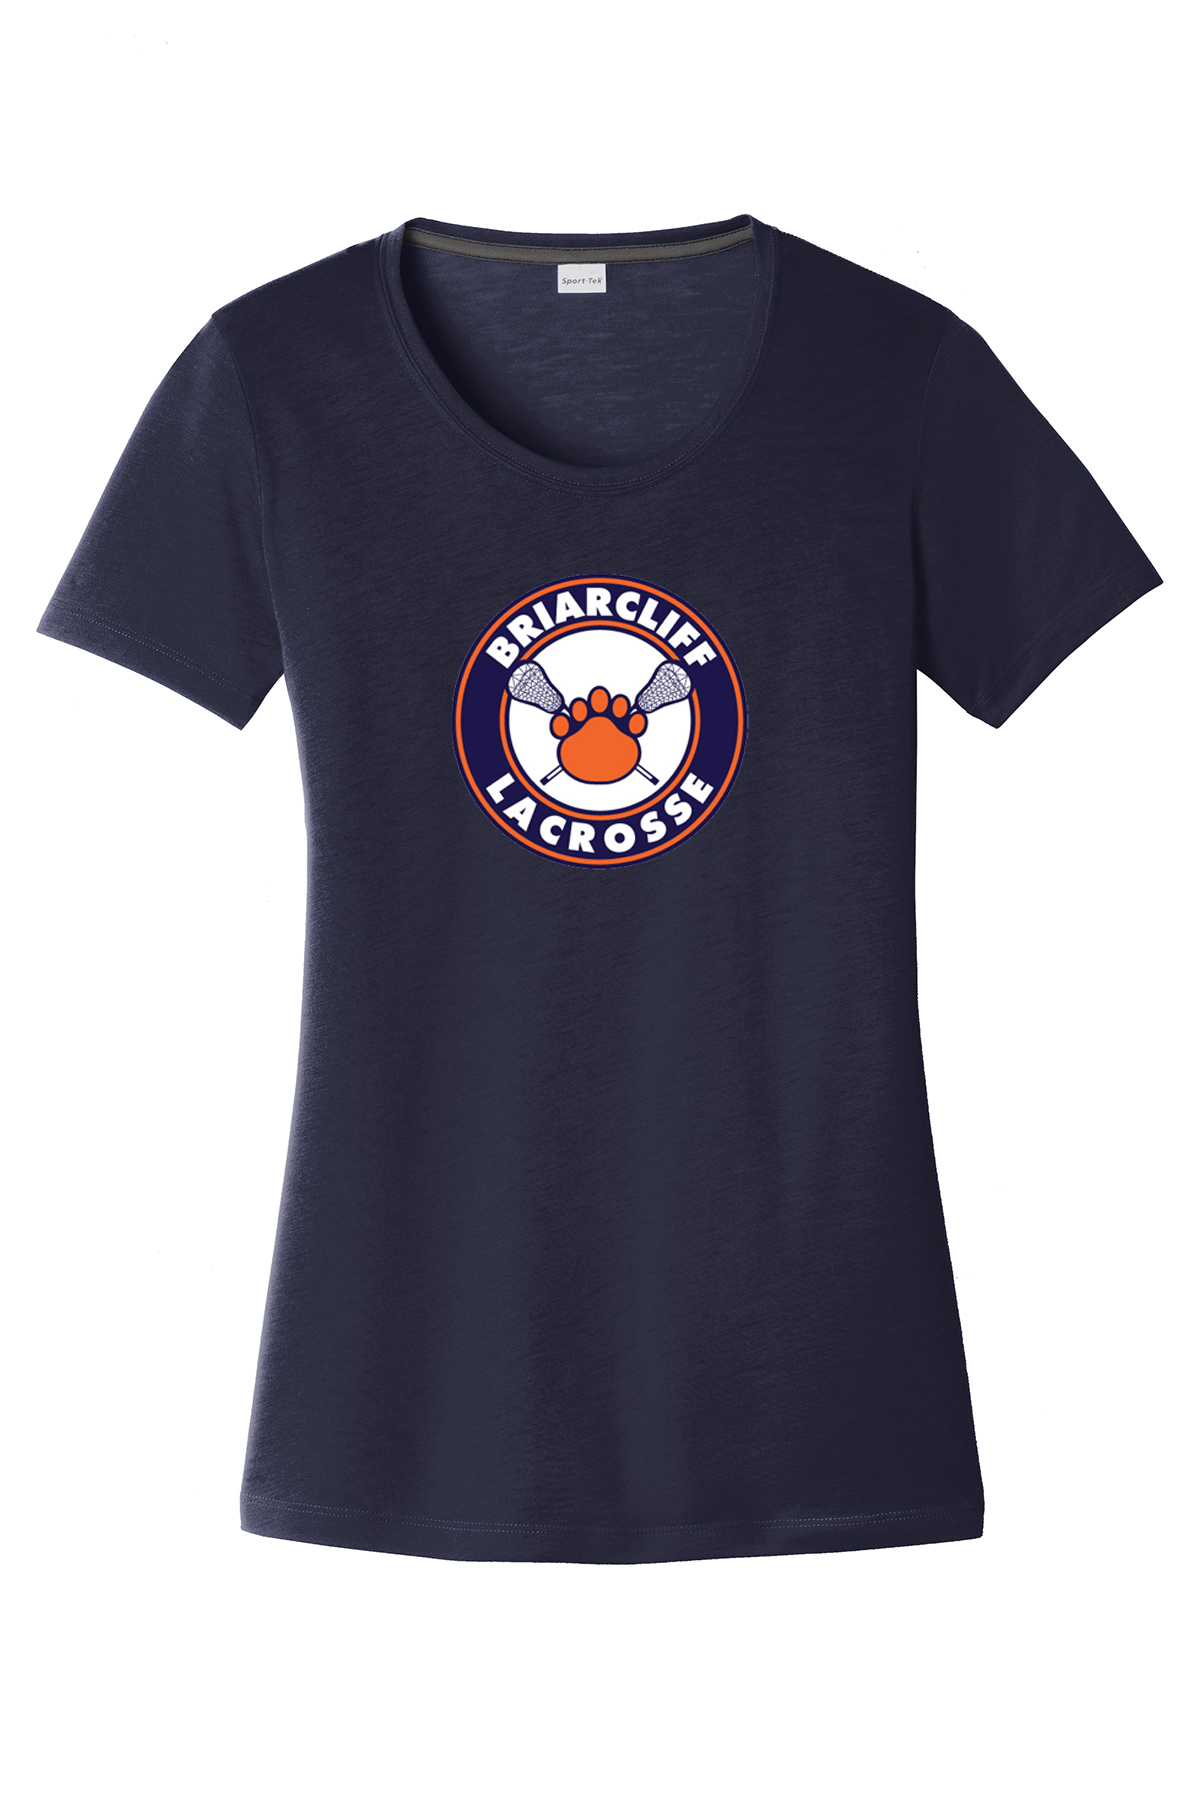 Briarcliff Lacrosse Navy Women's CottonTouch Performance T-Shirt